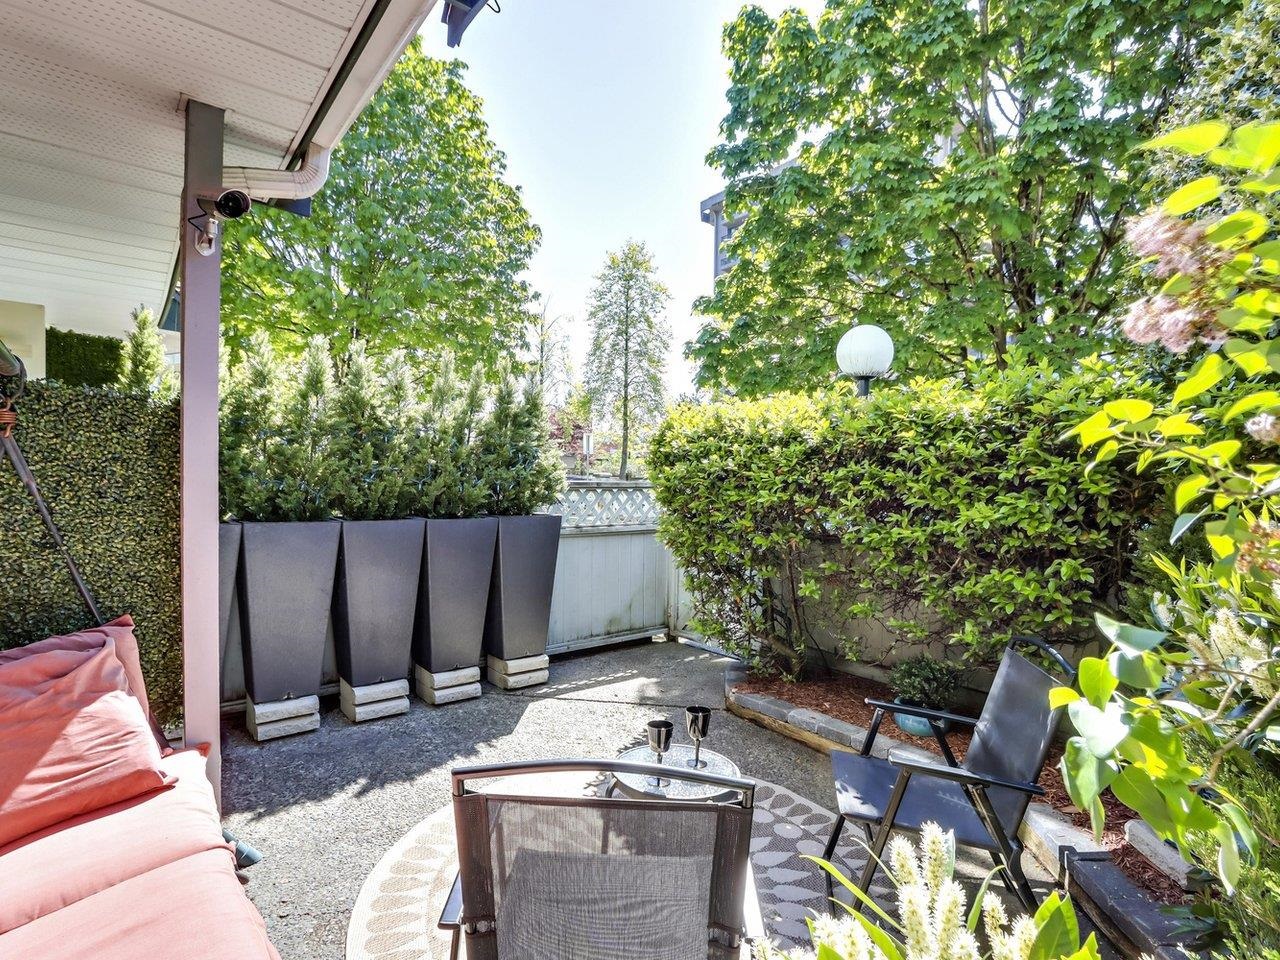 Vancouver Heights Apartment/Condo for sale:  1 bedroom 556 sq.ft. (Listed 3600-05-20)